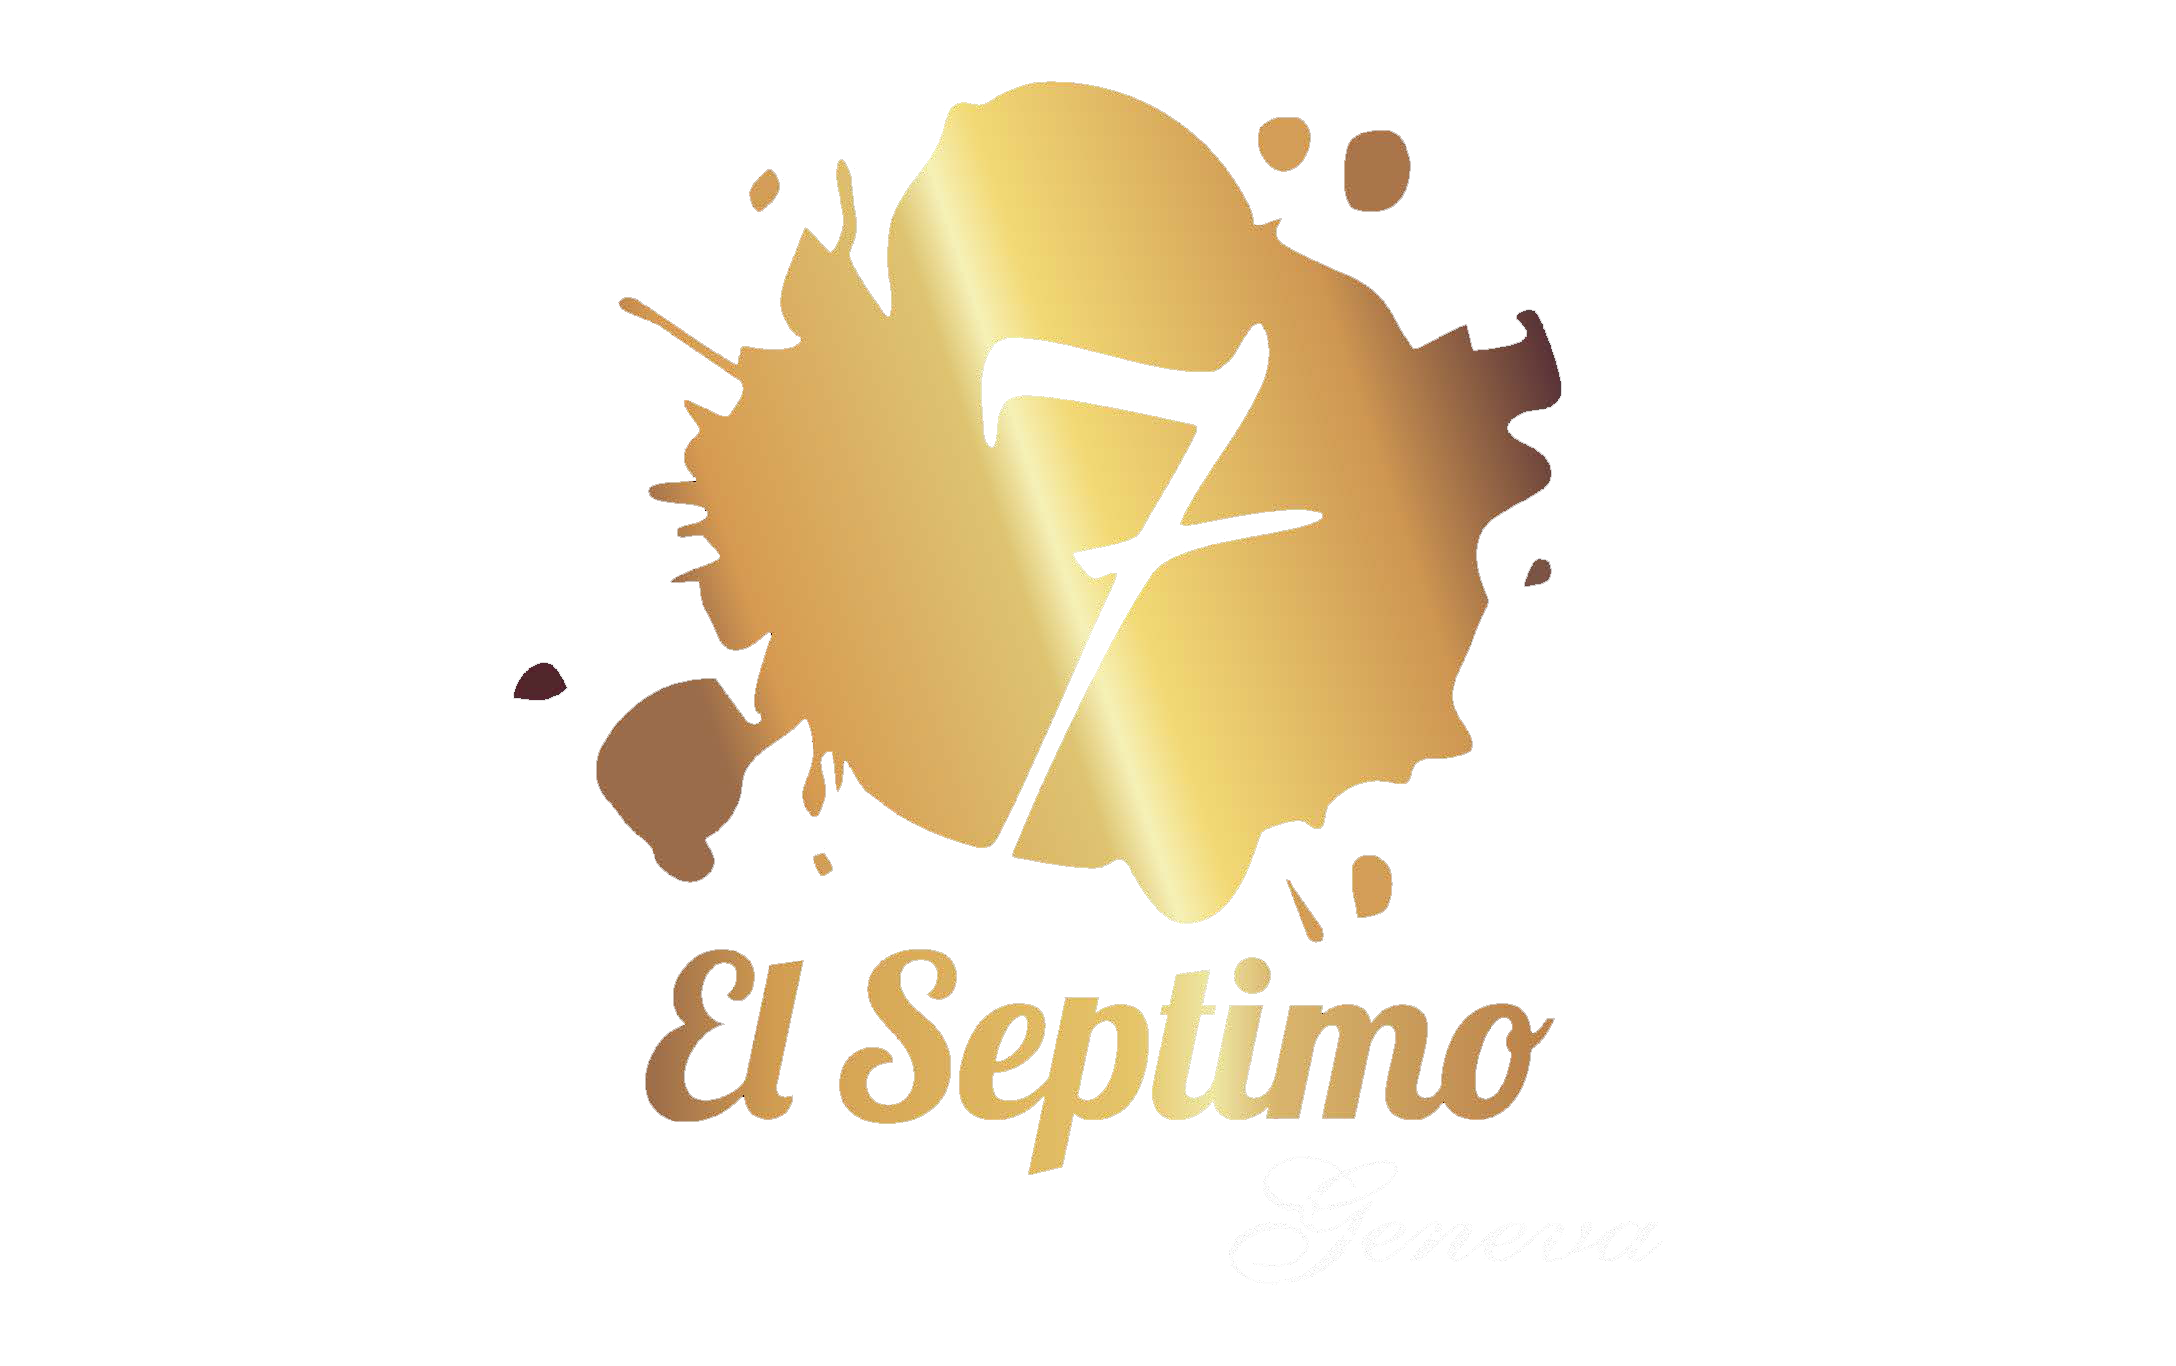 With over 40 blends, El Septimo cigars are premium, hand-rolled, puro cigars with fillers made of Costa Rican leaf and rolled using the traditional Entubar Cuban rolling technique. Tobacco is aged anywhere from 5 to 15 years, allowing oils and flavors to develop while leaving behind an unusually rich and creamy smoke.